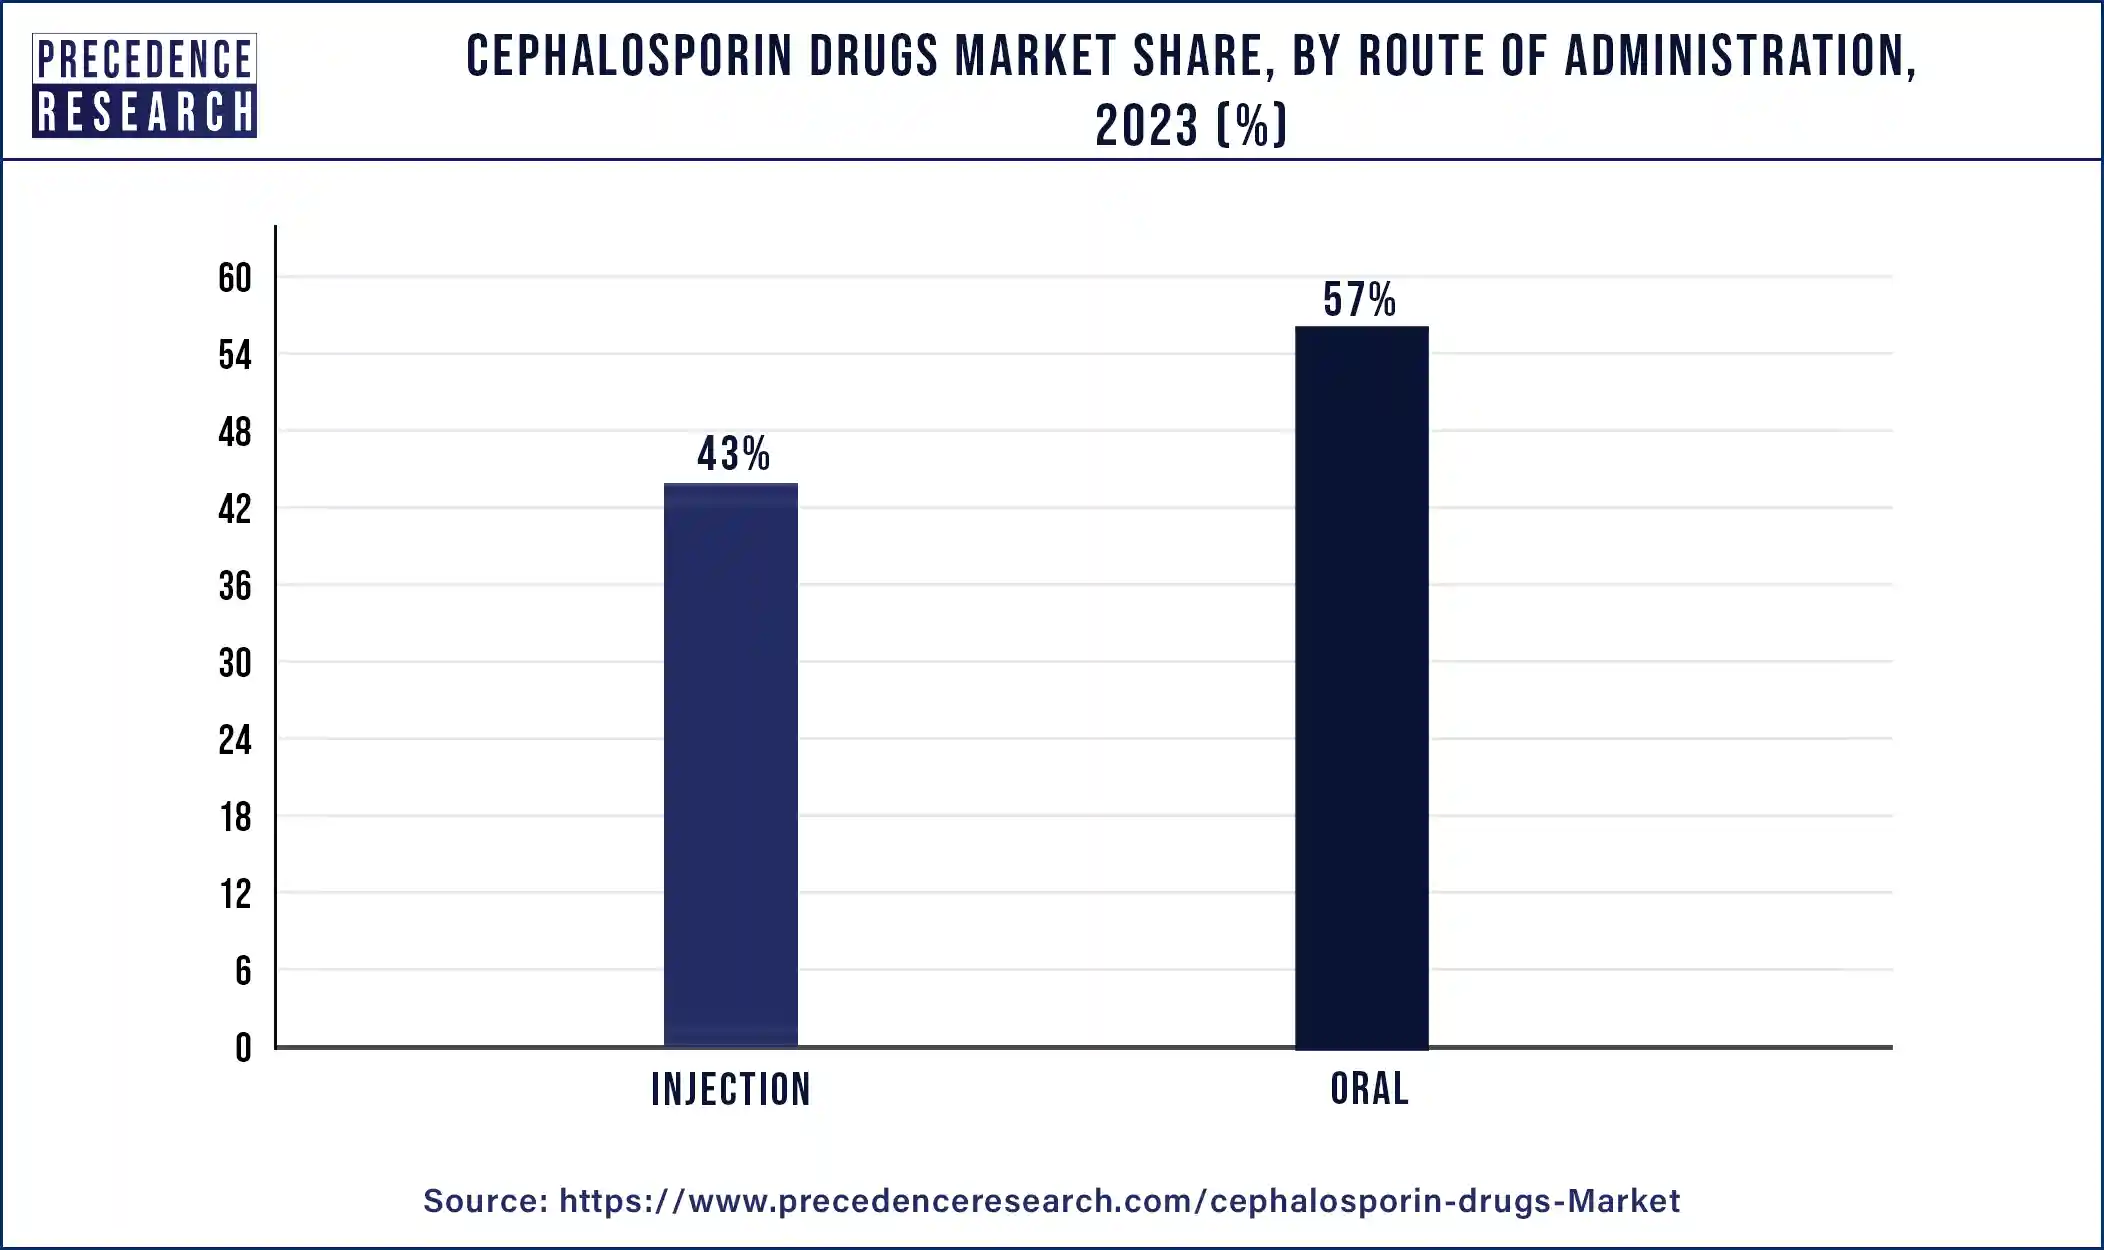 Cephalosporin Drugs Market Share, By Route of Administration 2023 (%)